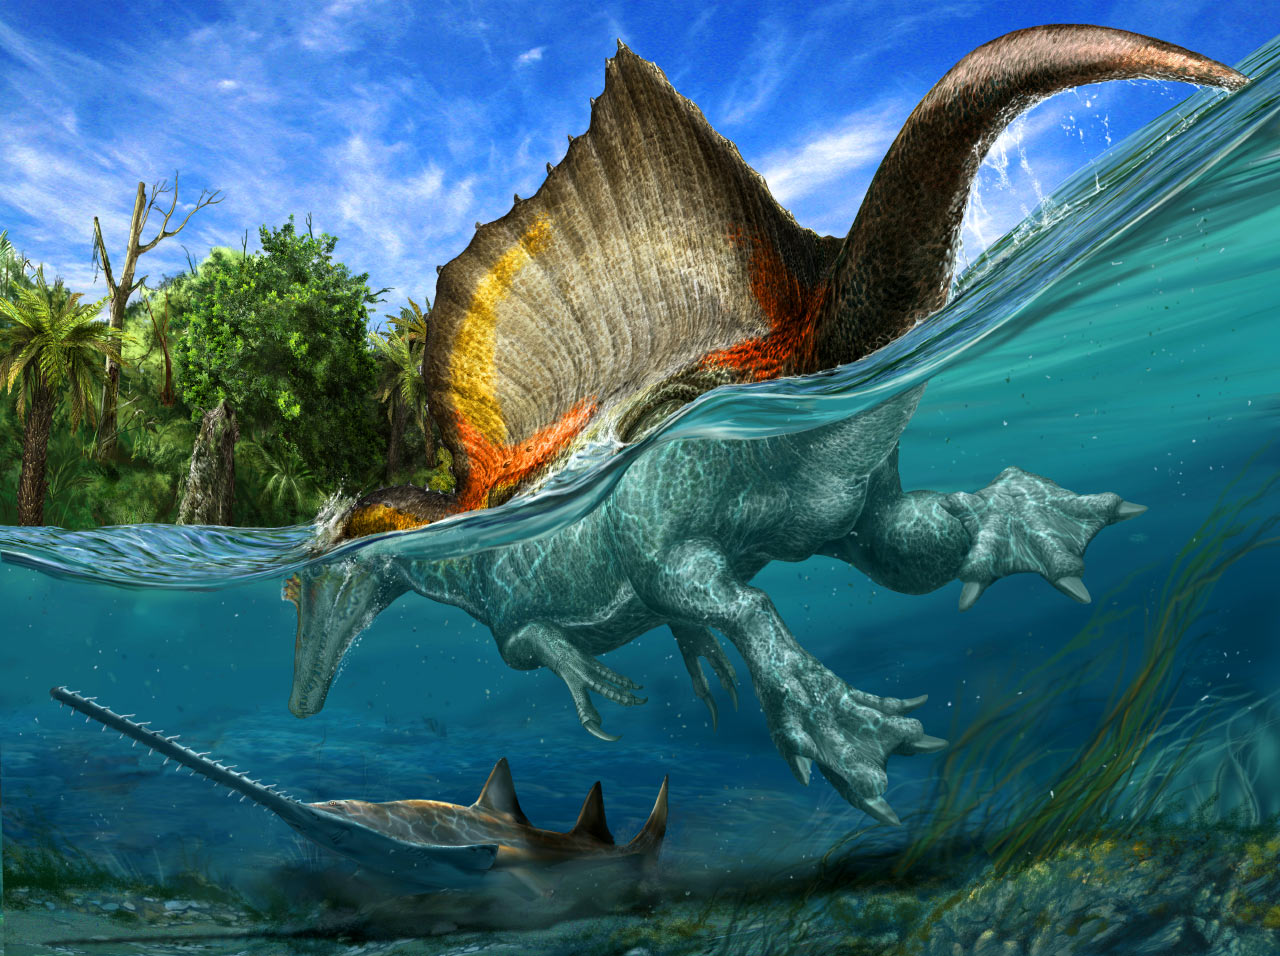 The only known dinosaur adapted to life in water, Spinosaurus aegyptiacus swam the rivers of North Africa about 95 million years ago. Image credit: © Davide Bonadonna / National Geographic magazine.